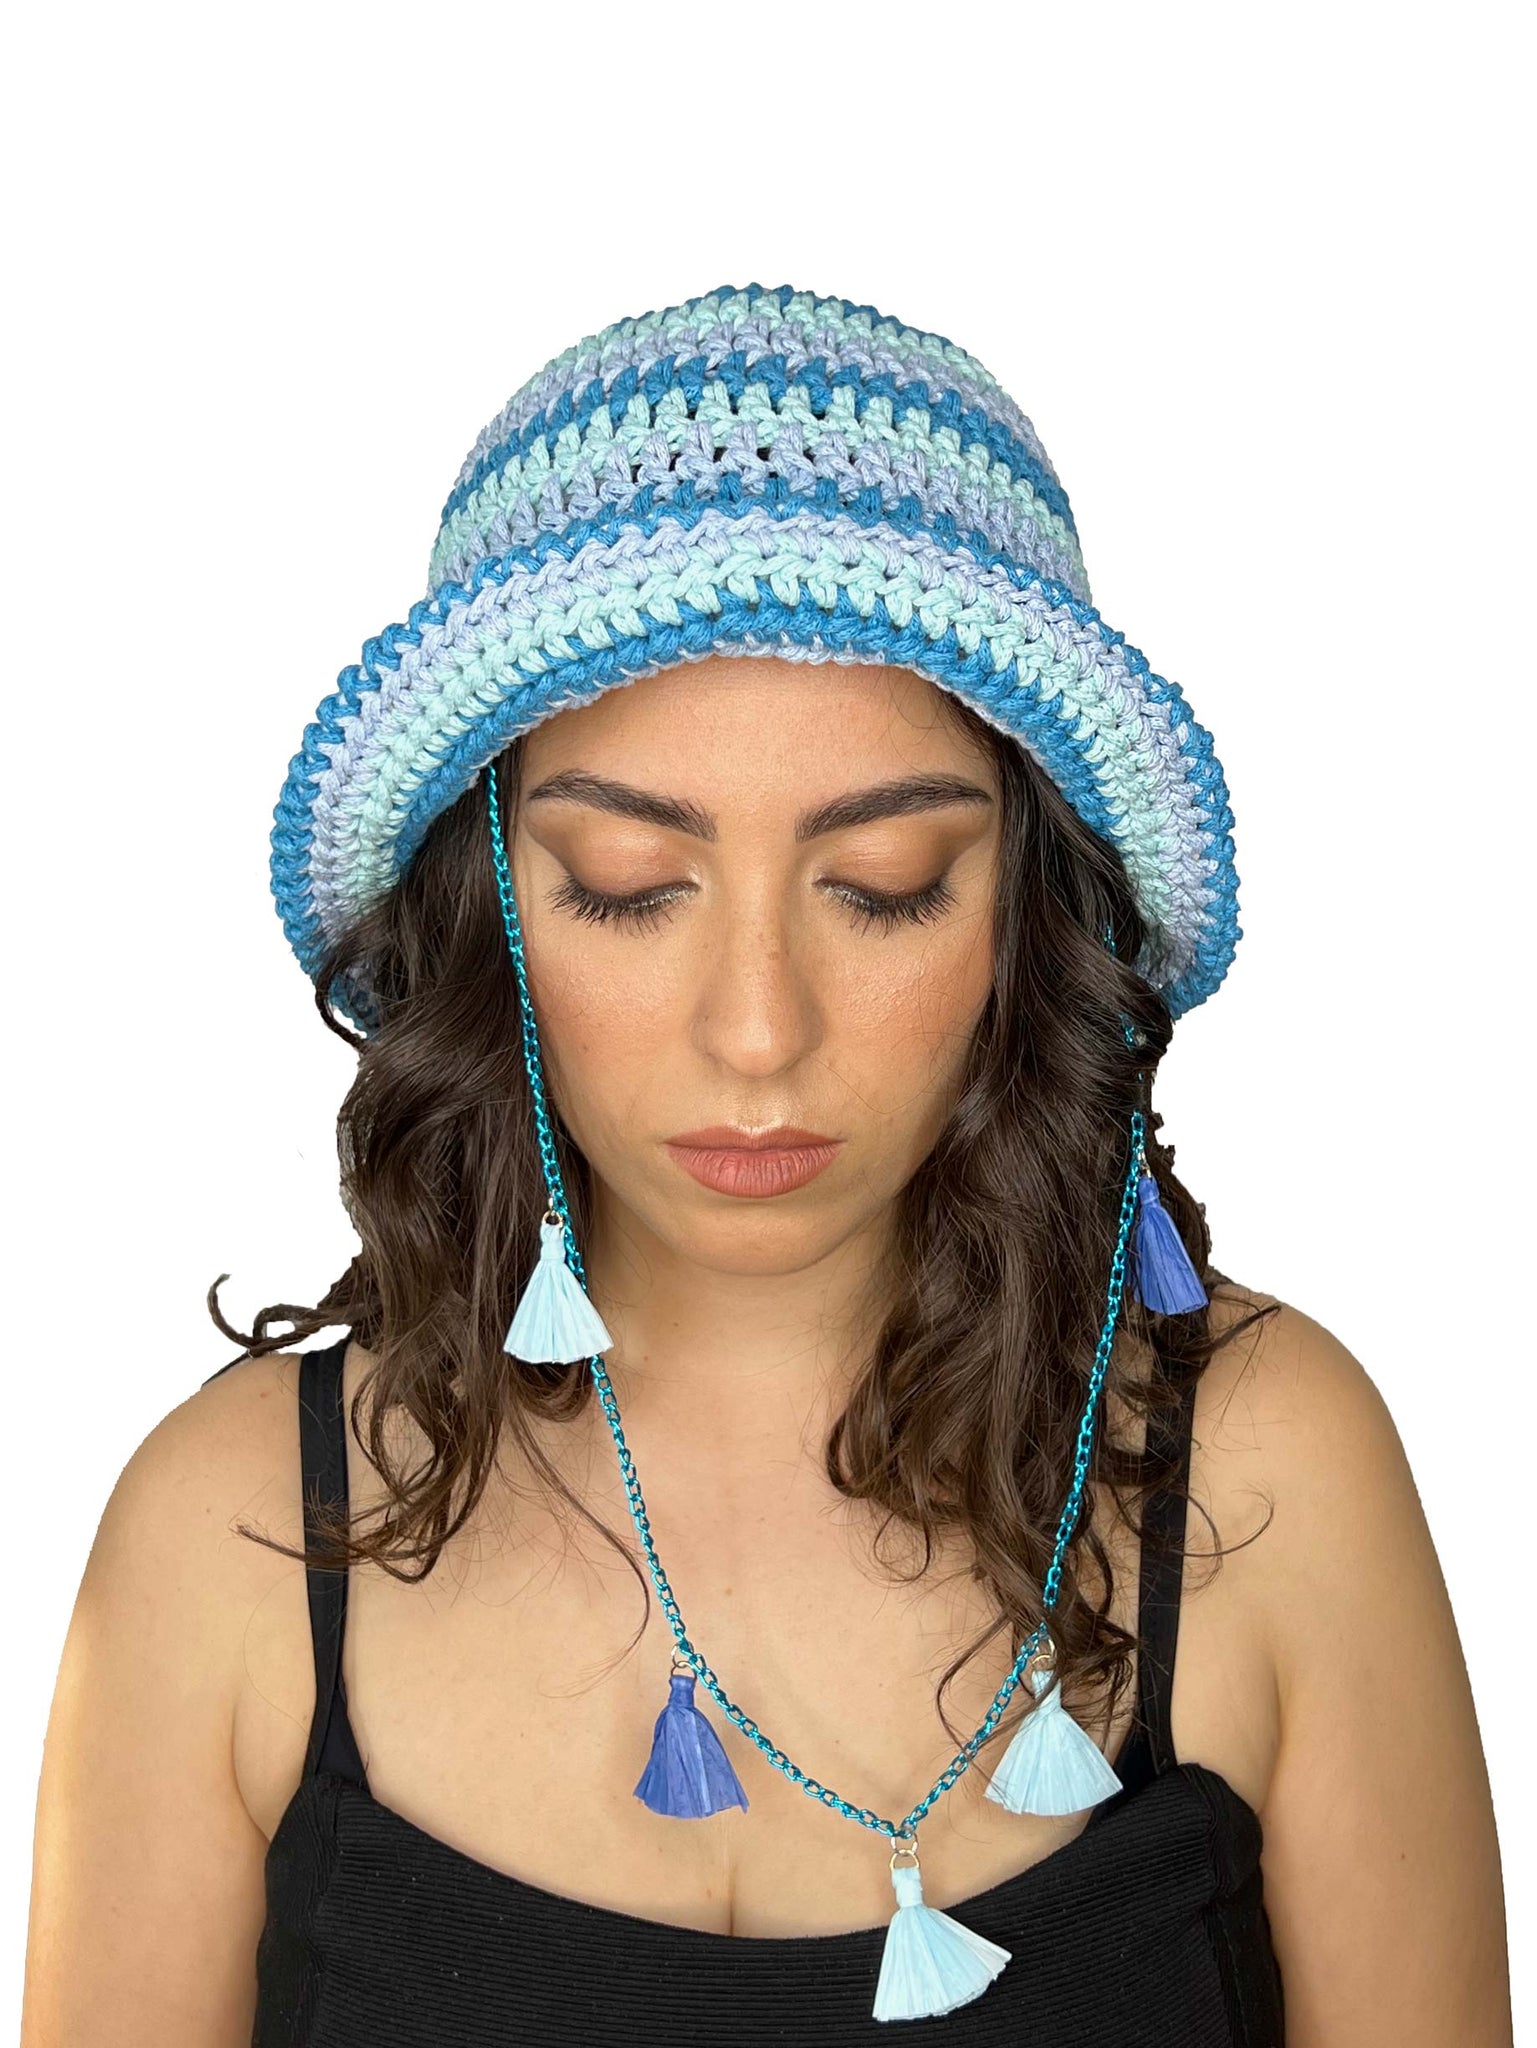 Light blue and grey striped crochet hat